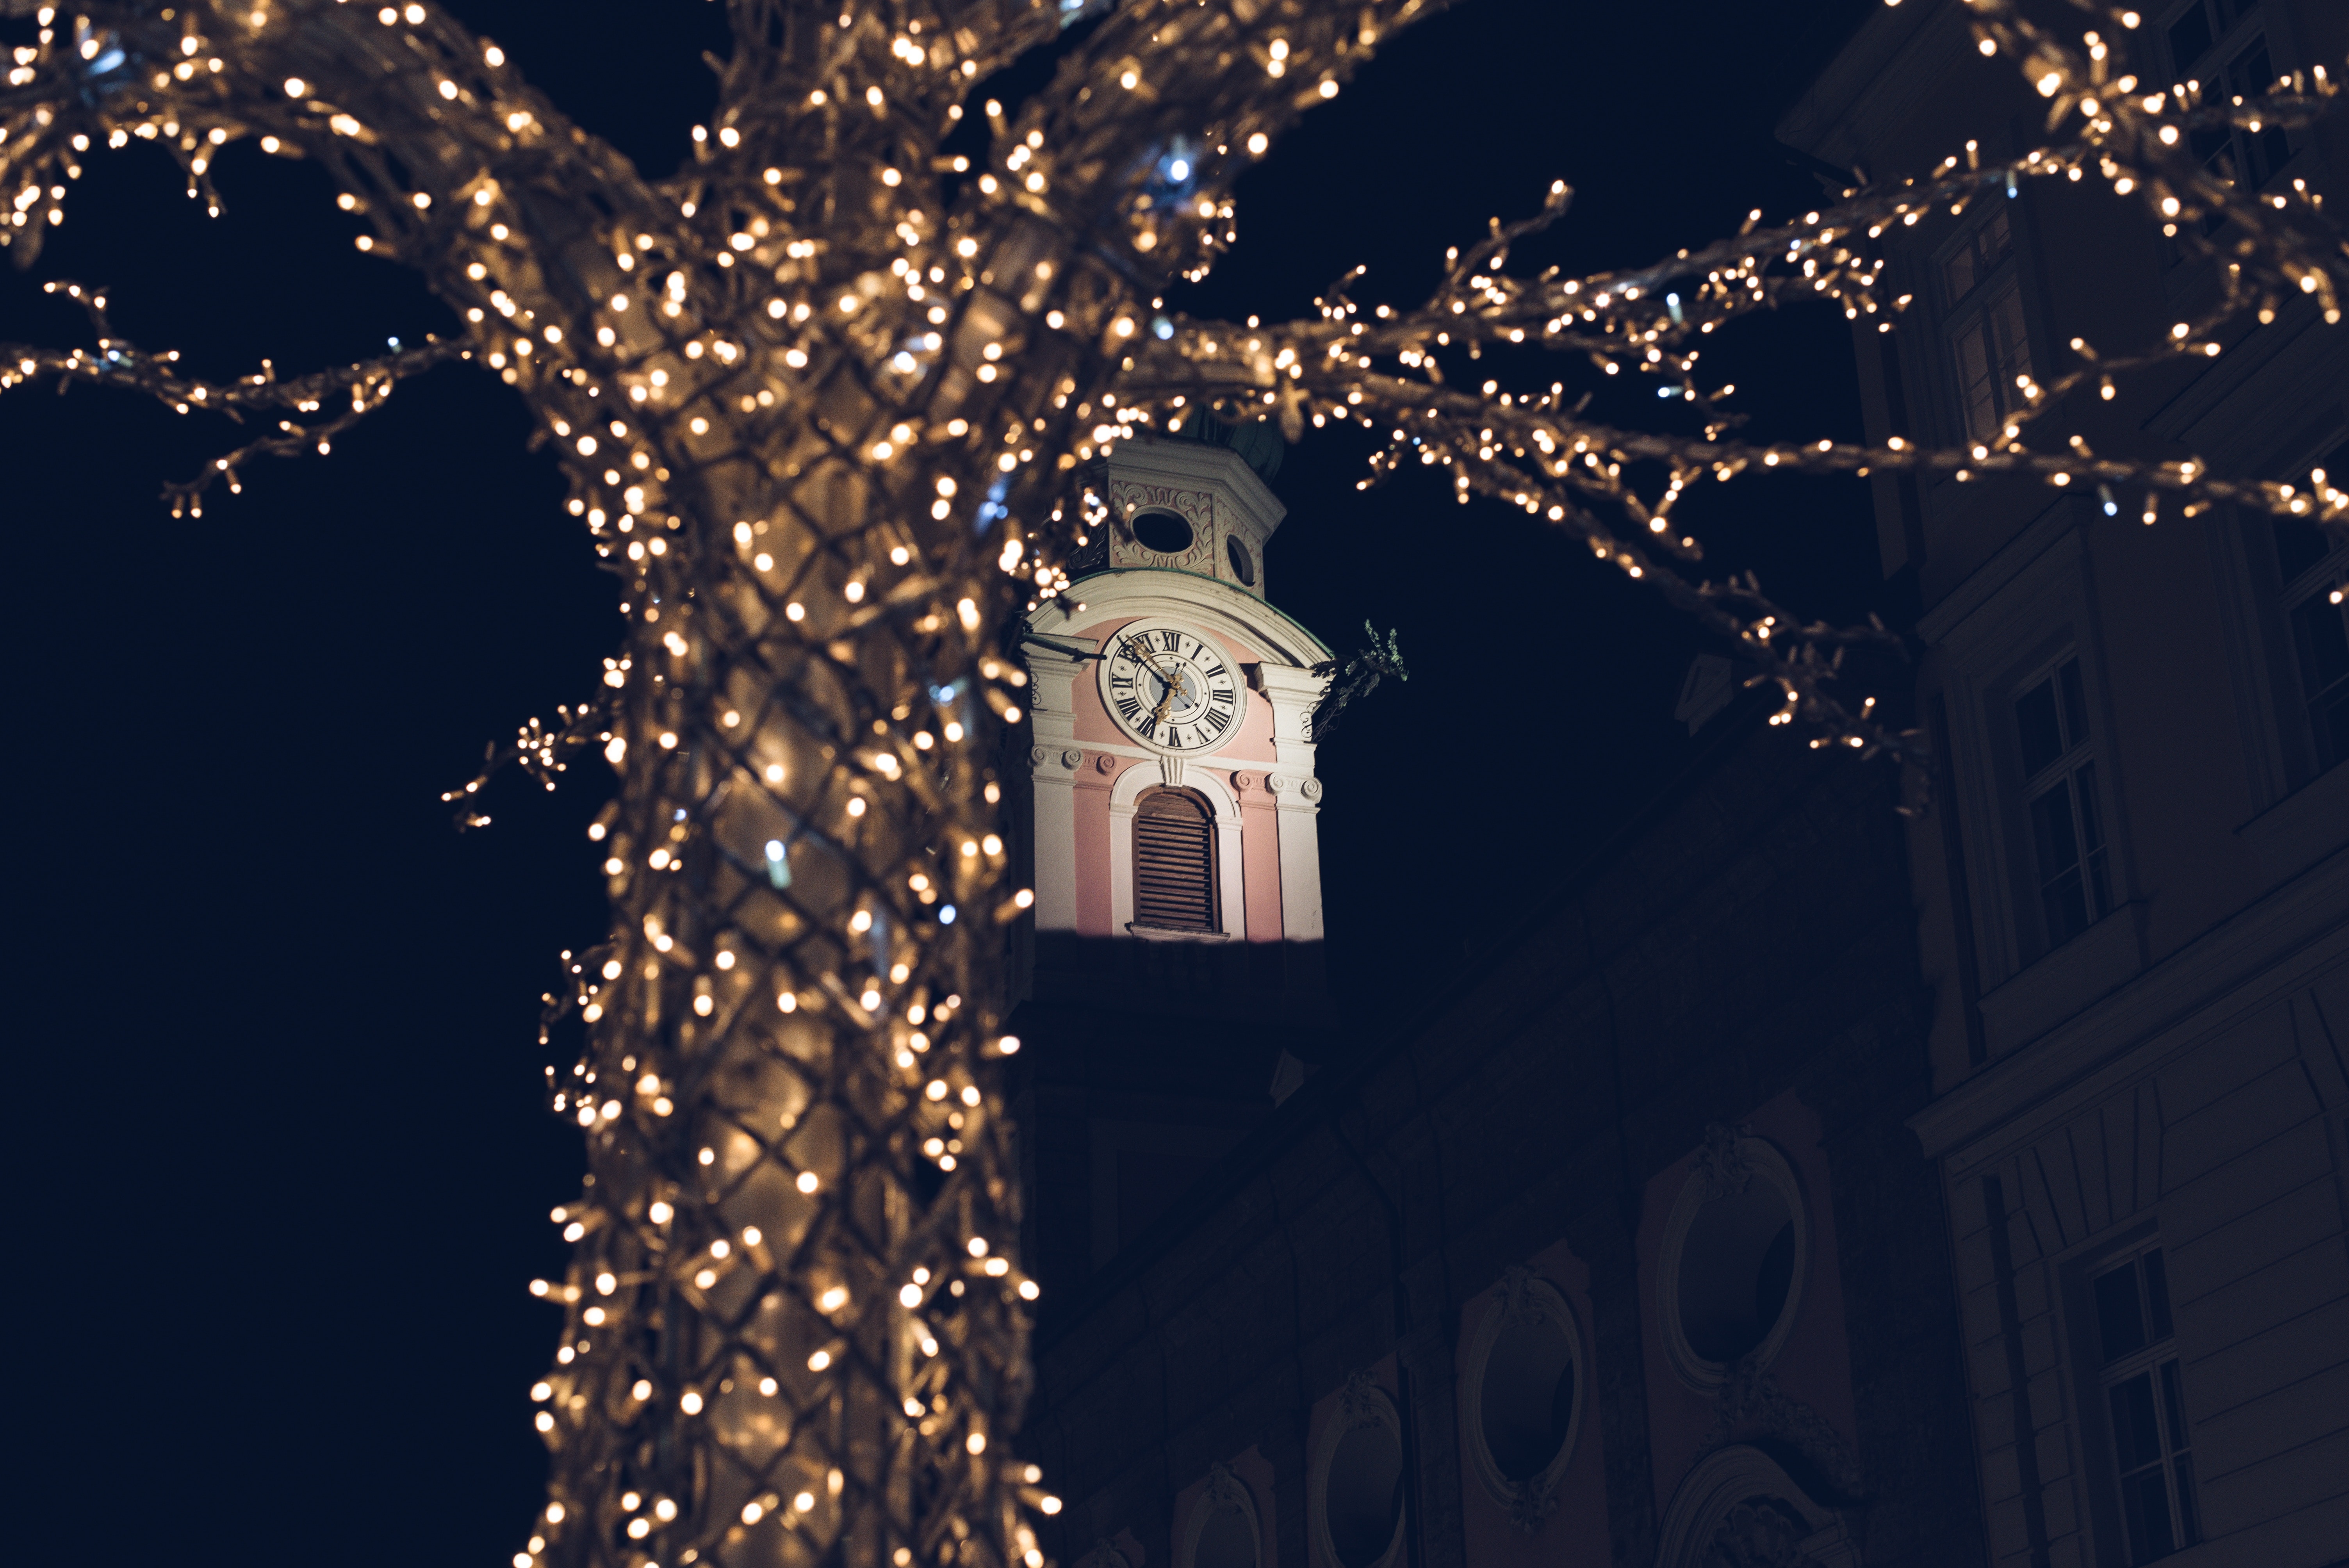 photo of tree with string lights near white clock tower